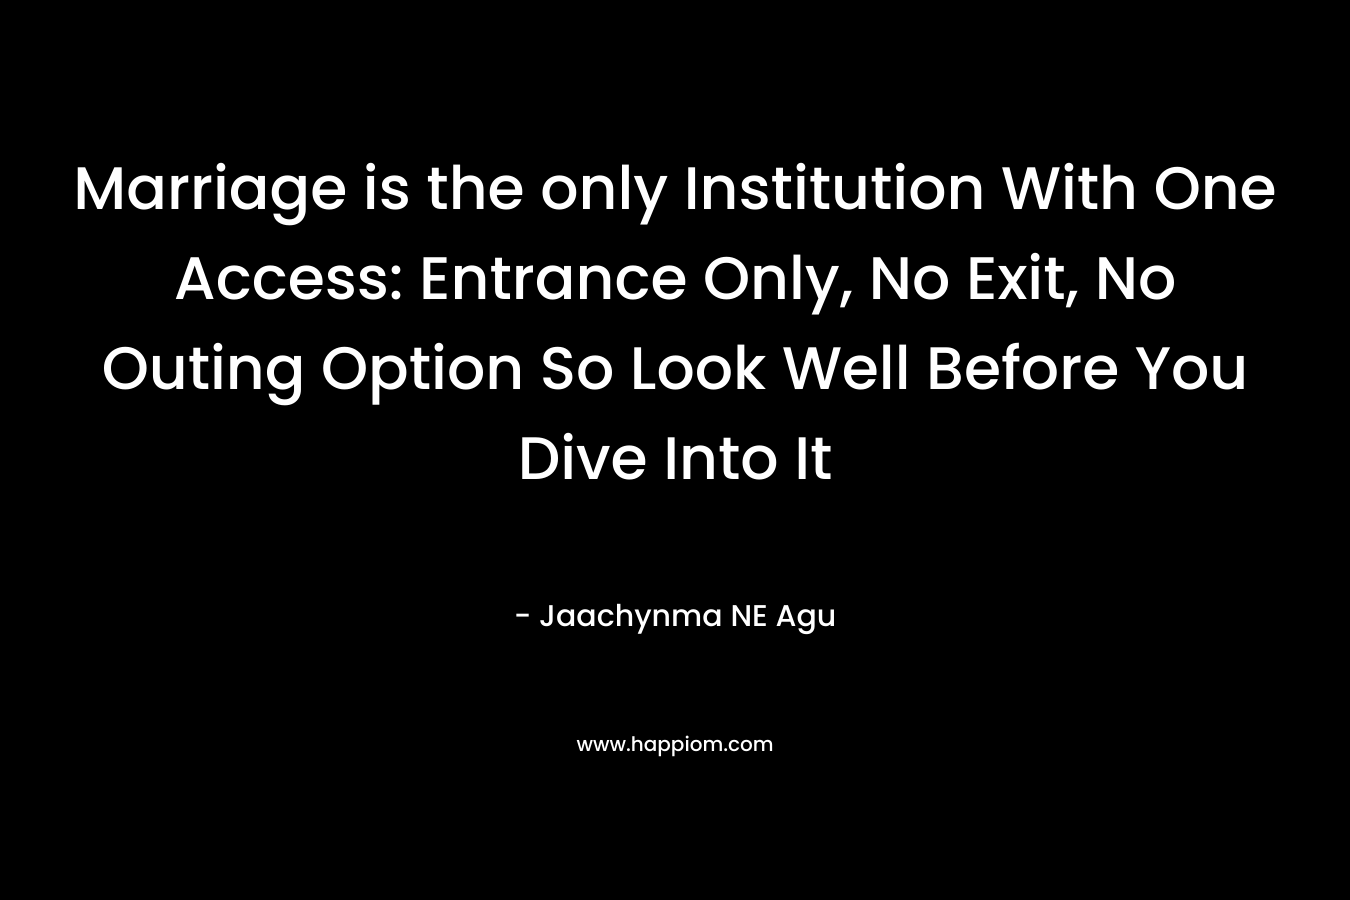 Marriage is the only Institution With One Access: Entrance Only, No Exit, No Outing Option So Look Well Before You Dive Into It – Jaachynma NE Agu